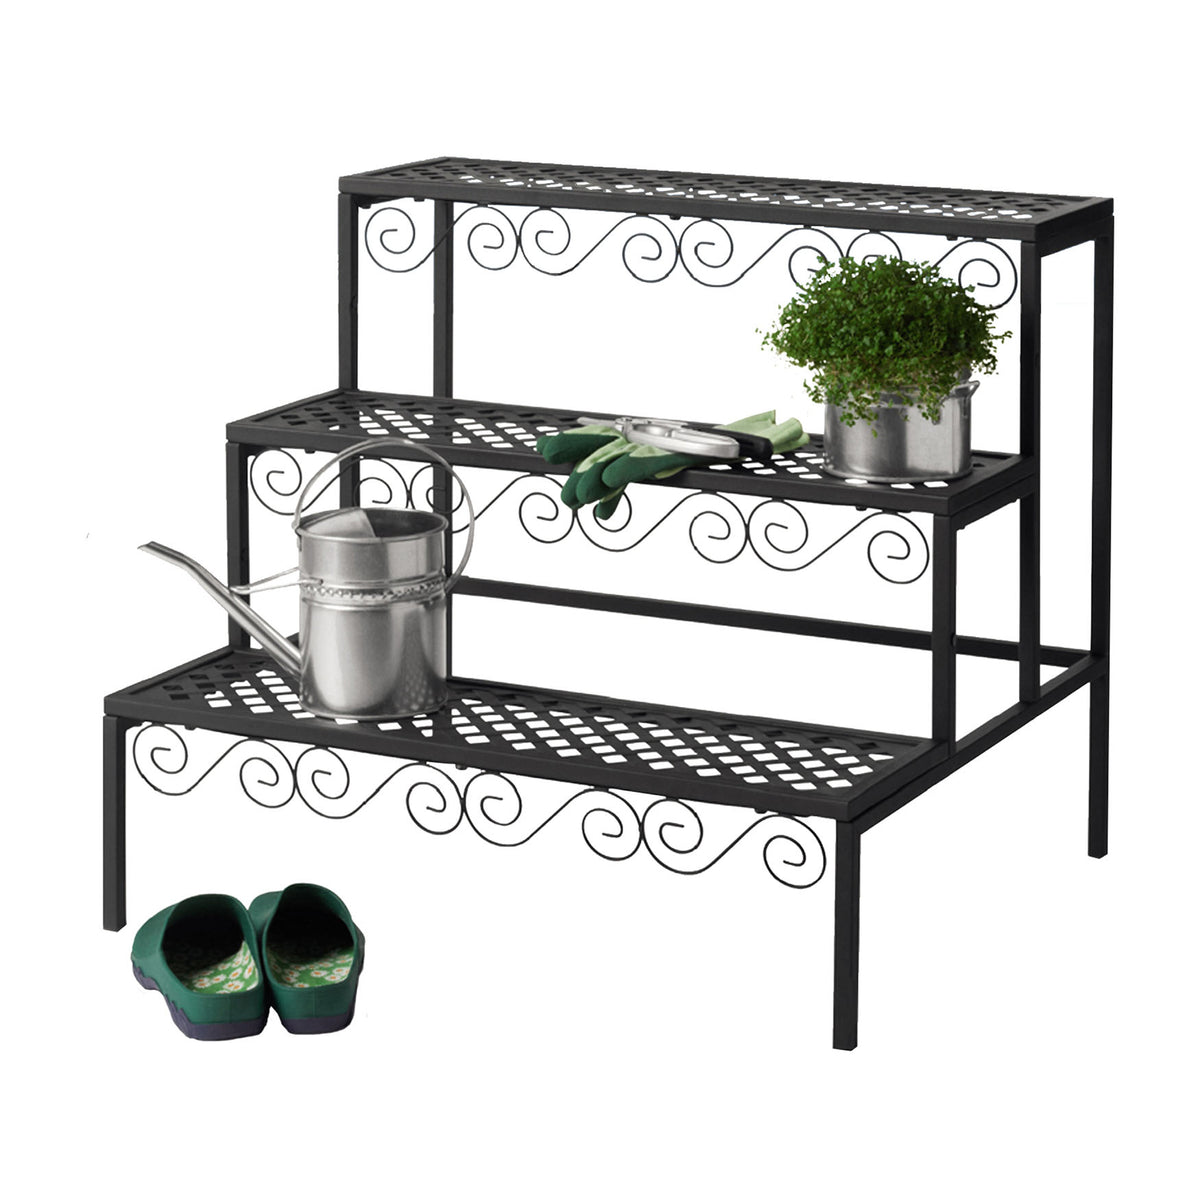 Middle Plant Stand